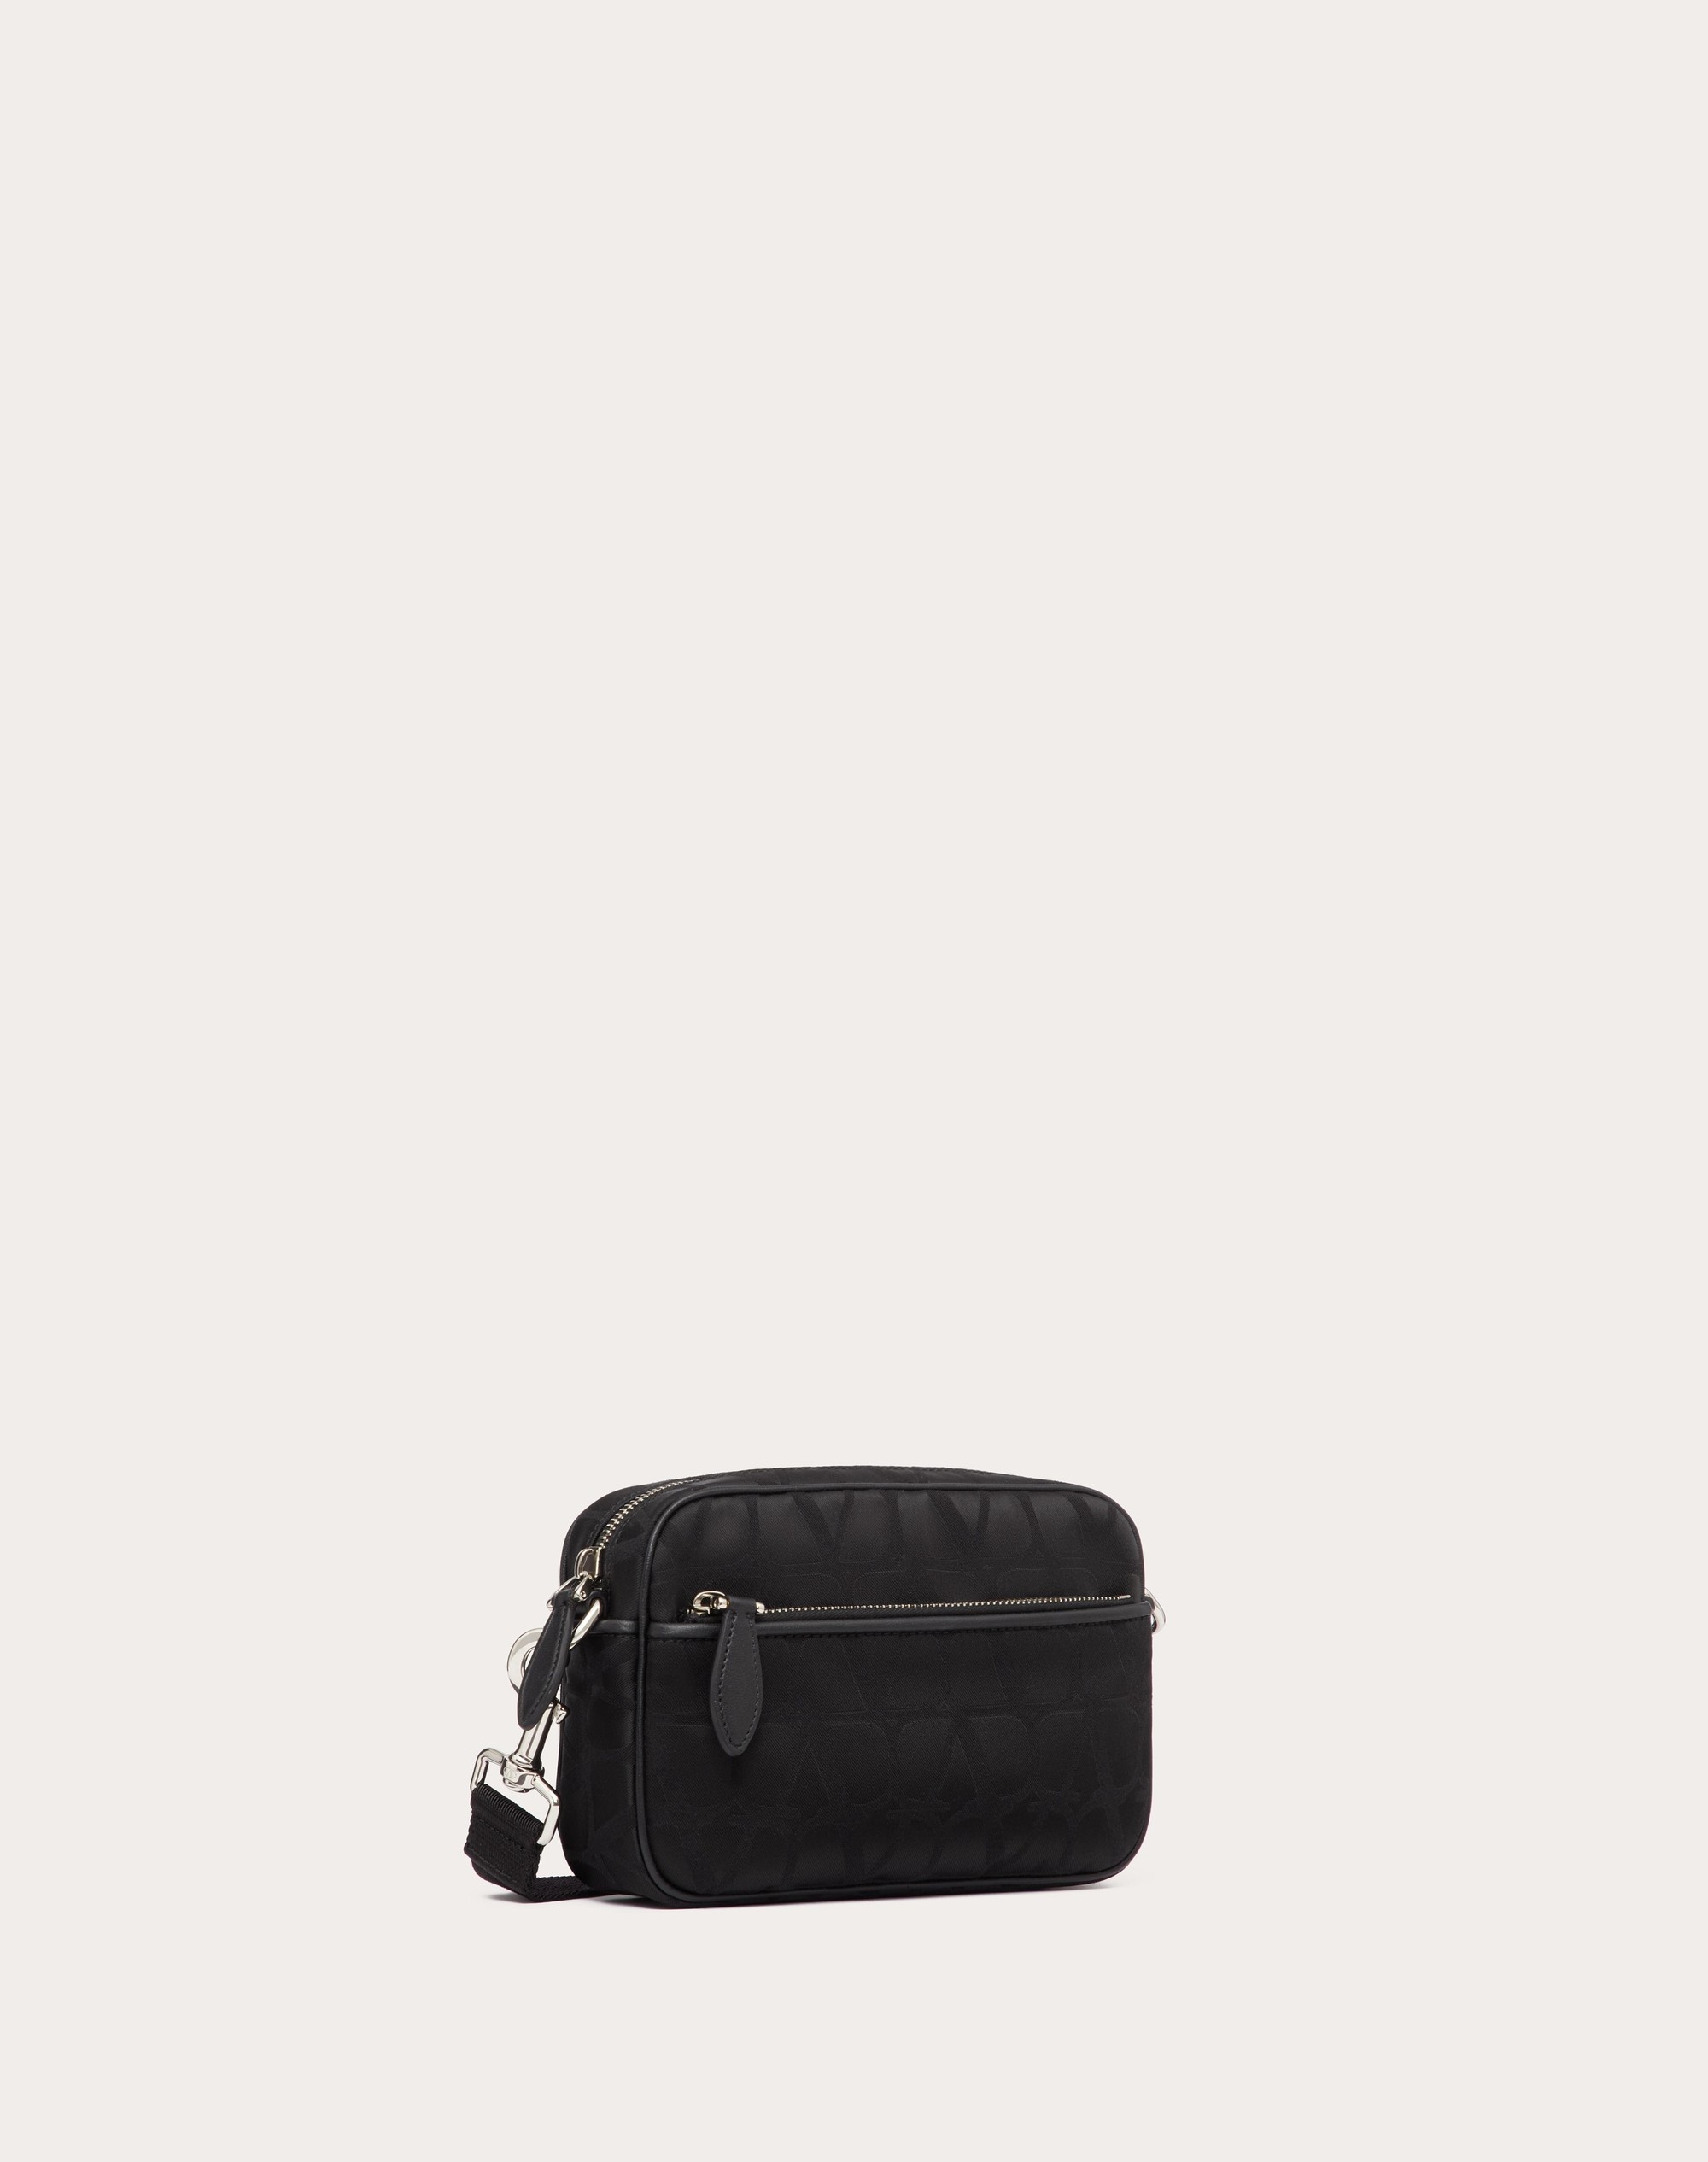 TOILE ICONOGRAPHE SHOULDER BAG IN TECHNICAL FABRIC WITH LEATHER DETAILS - 3